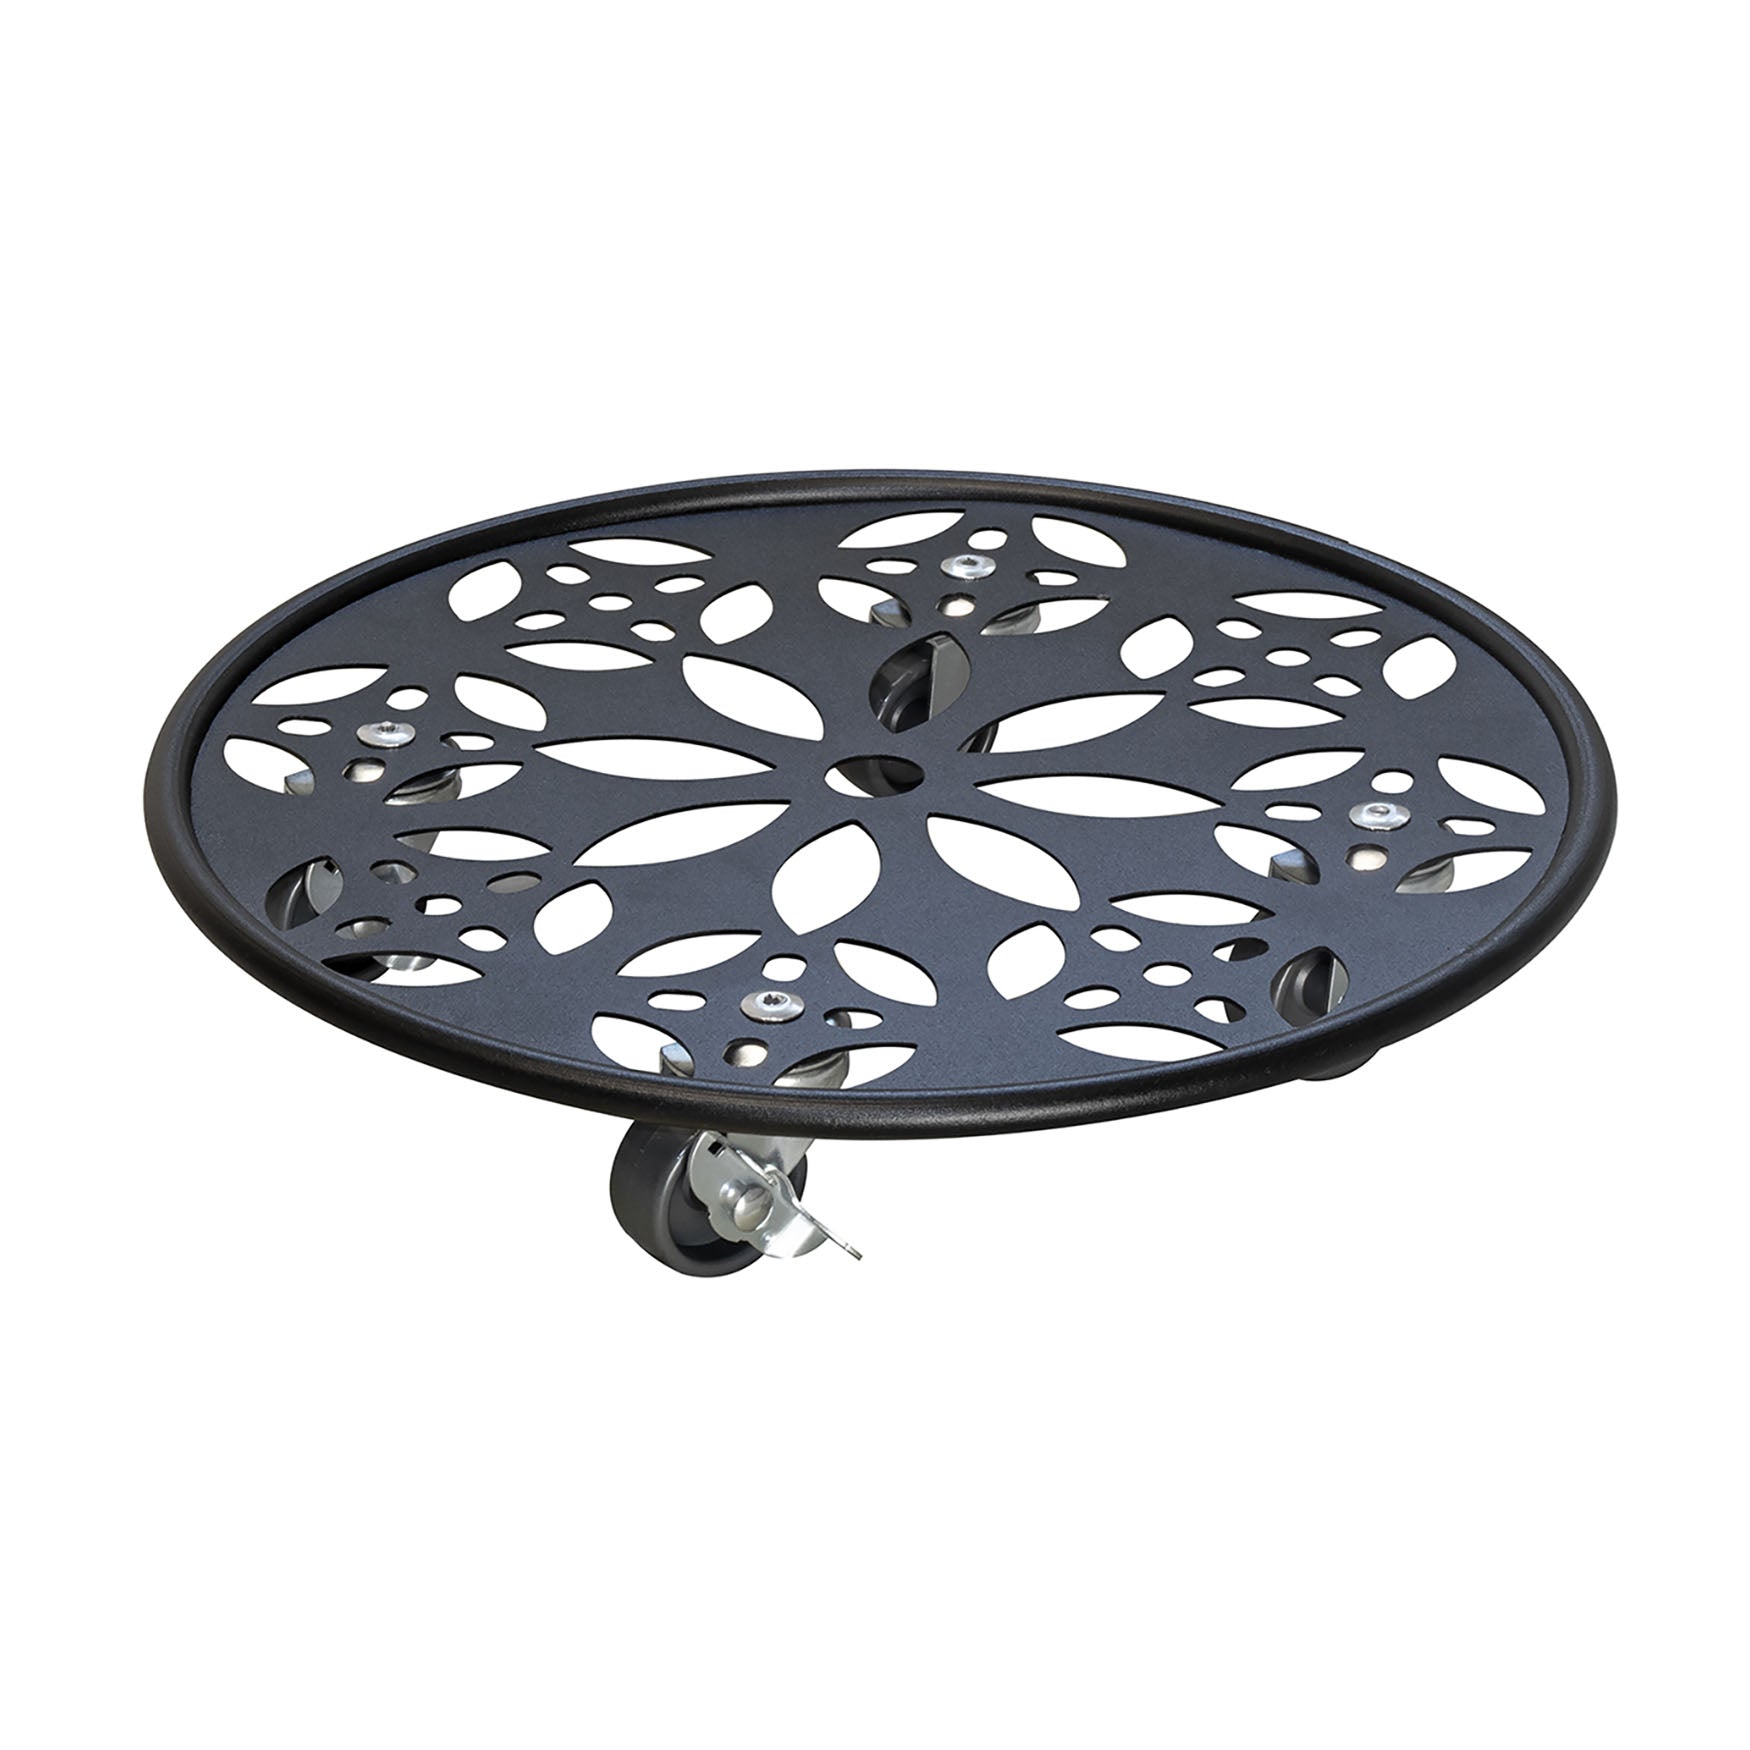 Black Round Flower Steel Plant Caddy with brakes. Water resistant. Flower design. 220 lbs capacity. 11.8"D x 2.25"H, 1.8 lbs.